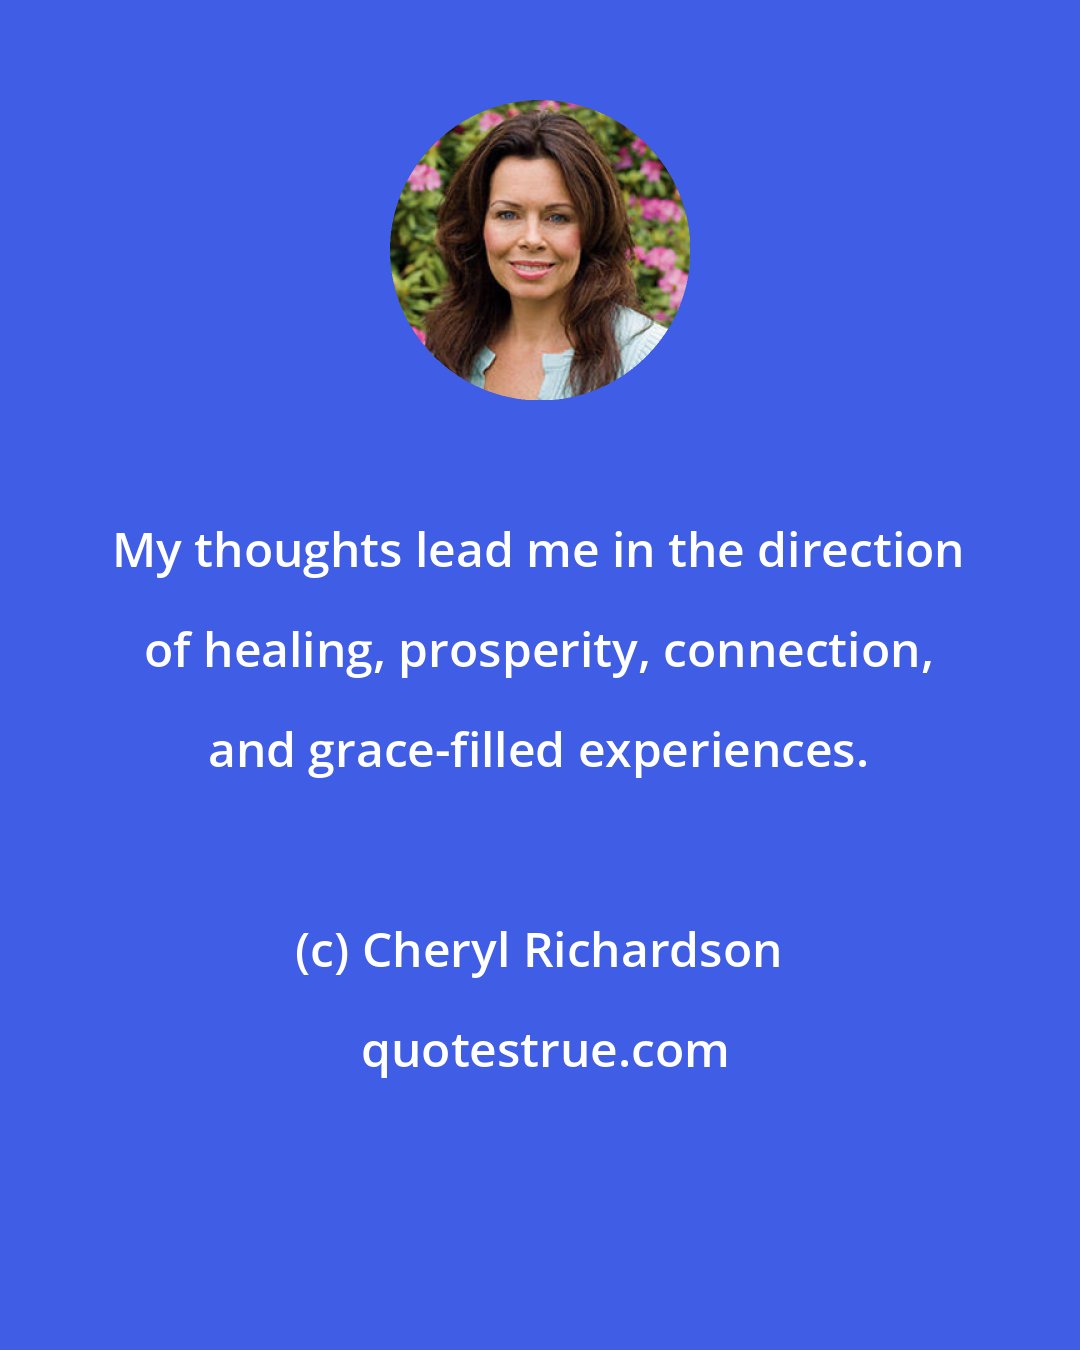 Cheryl Richardson: My thoughts lead me in the direction of healing, prosperity, connection, and grace-filled experiences.